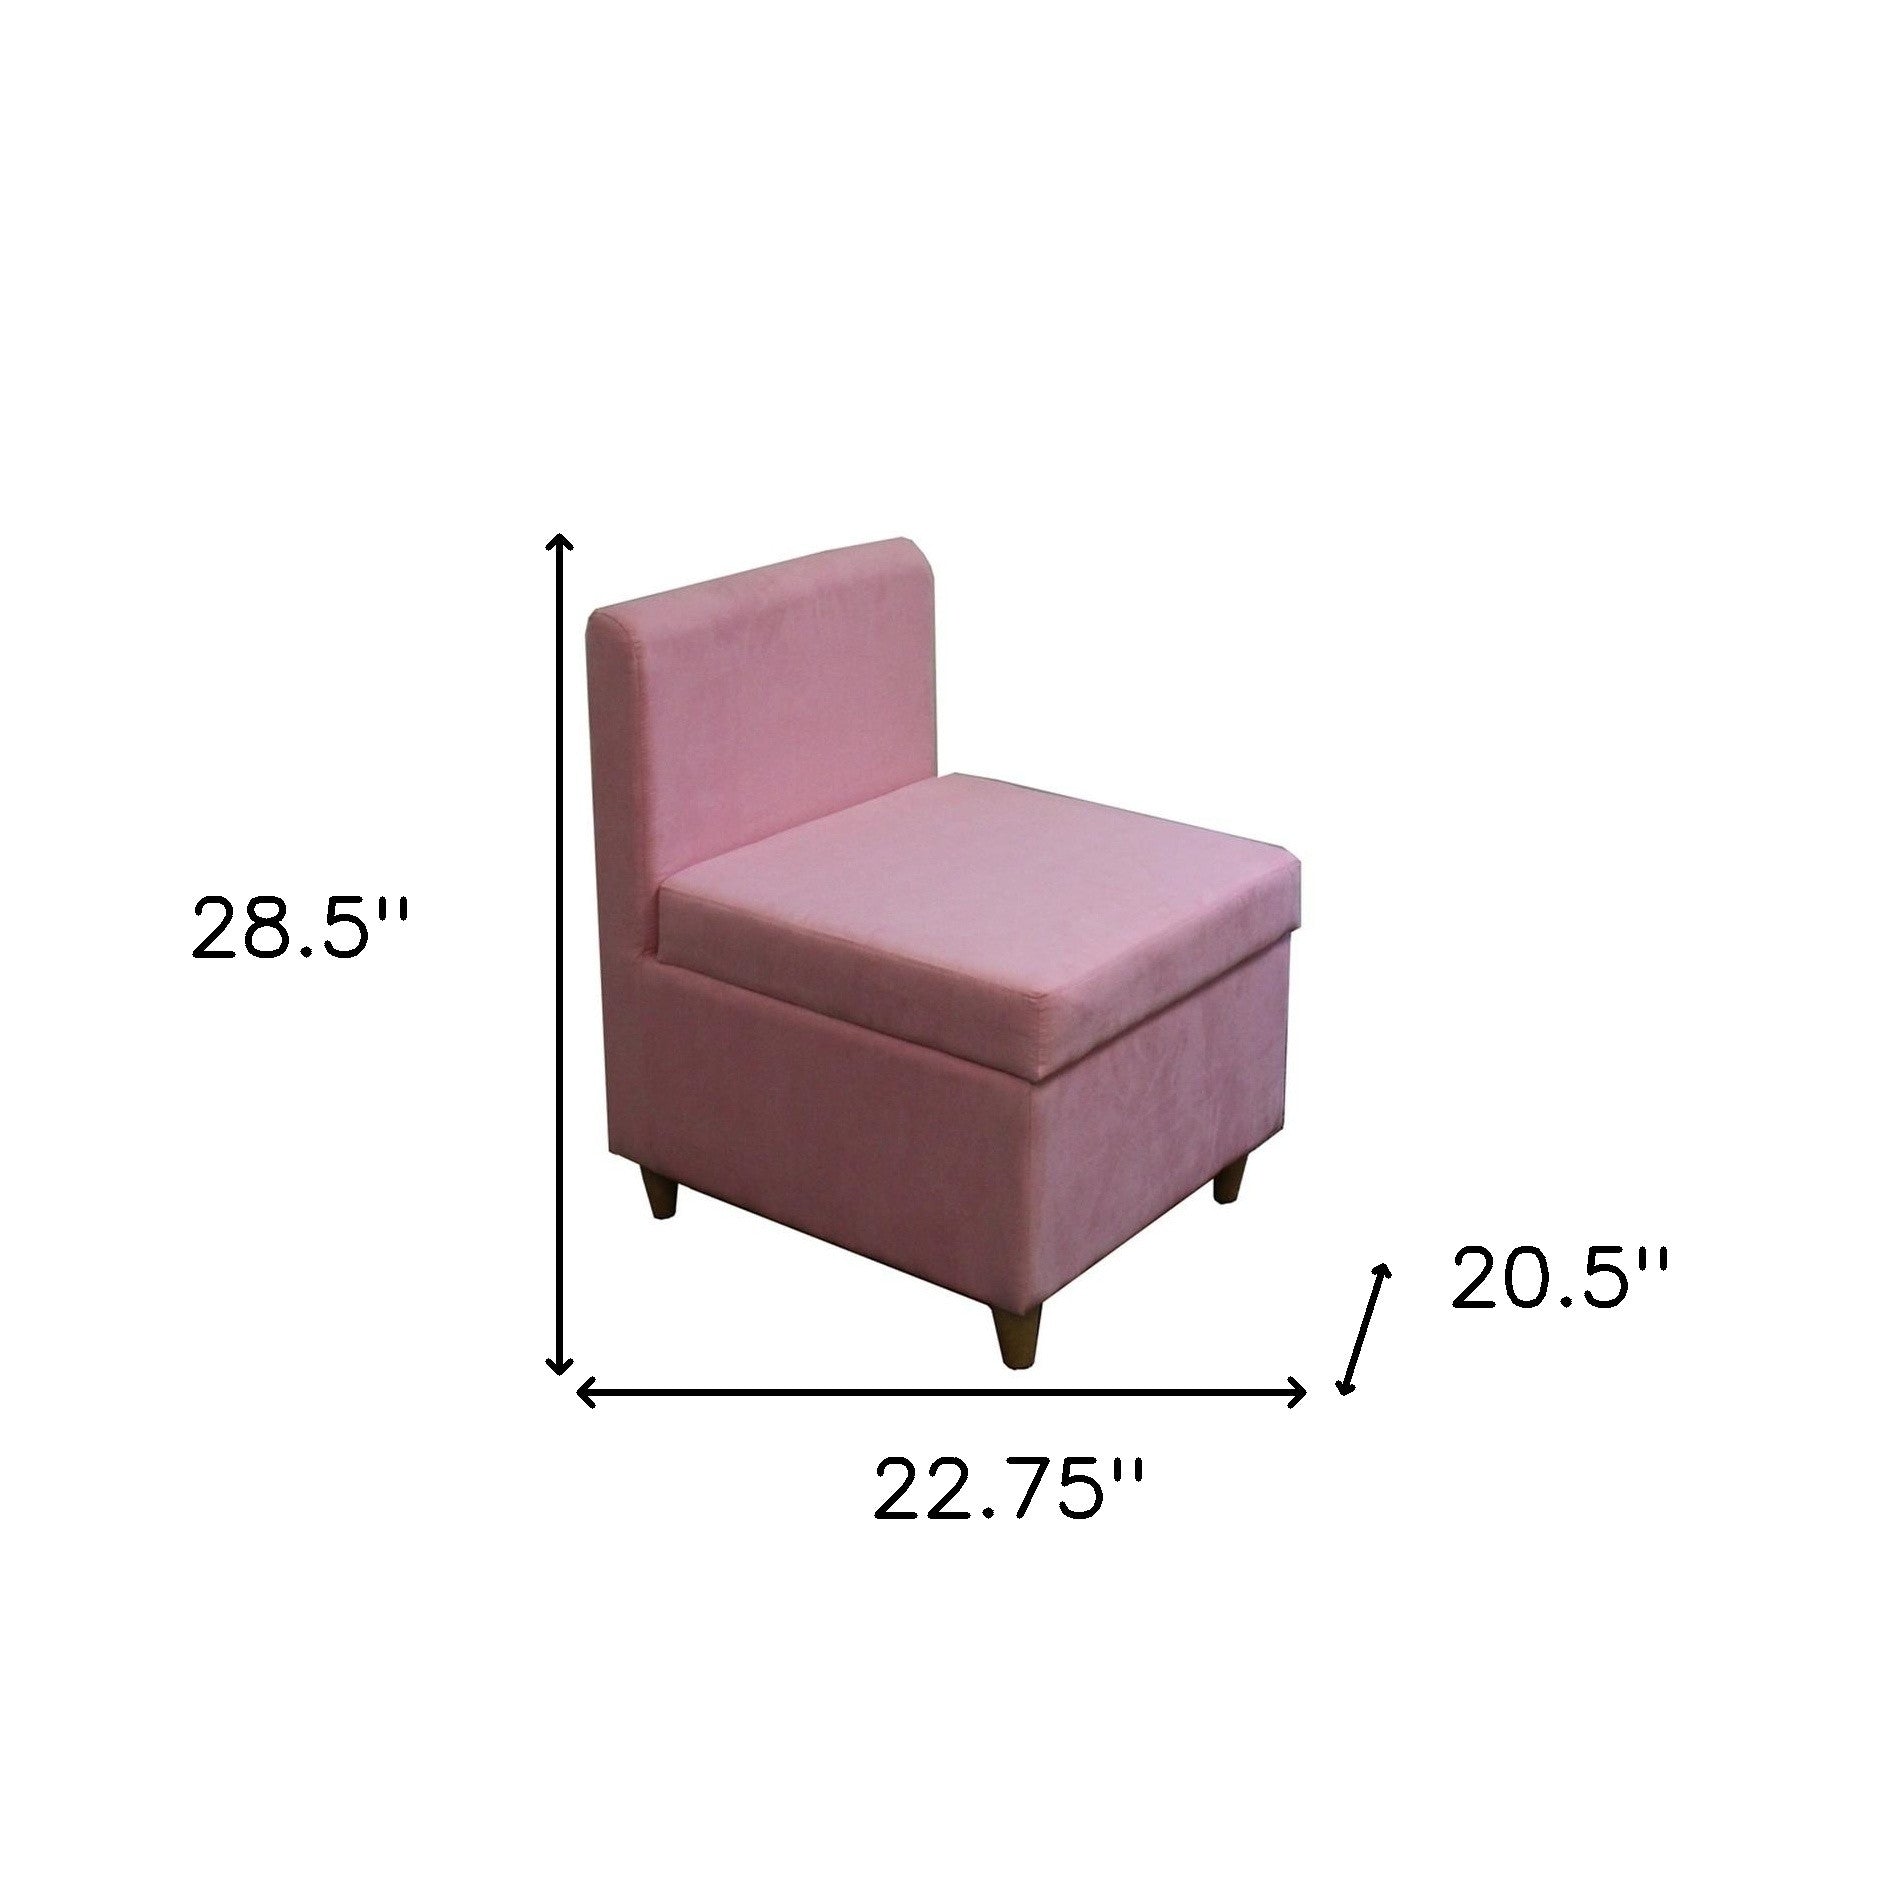 29" Mod Pink Mauve Microfiber Armless Accent Chair with Storage